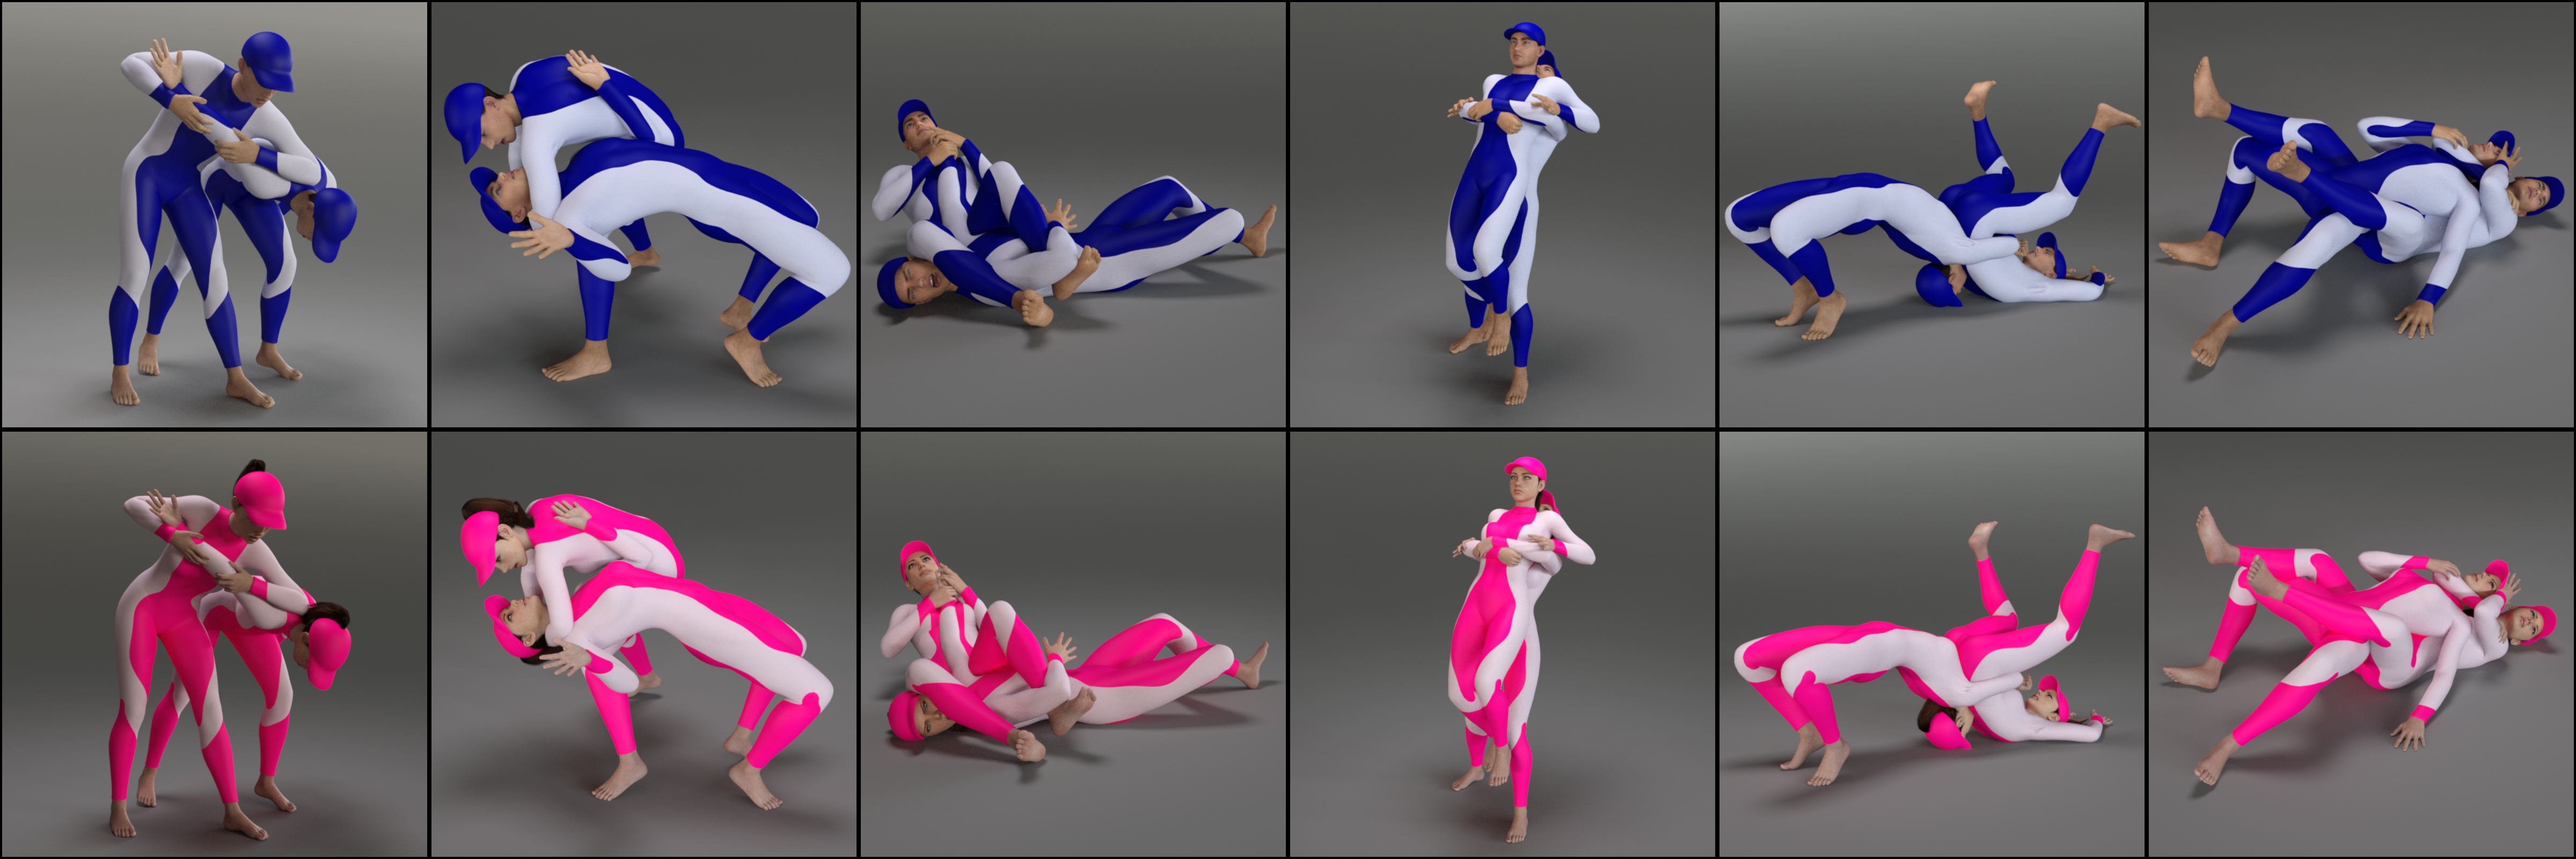 Grappling Poses Volume 3 for Genesis 8 and 8.1 by: atrilliongames, 3D Models by Daz 3D